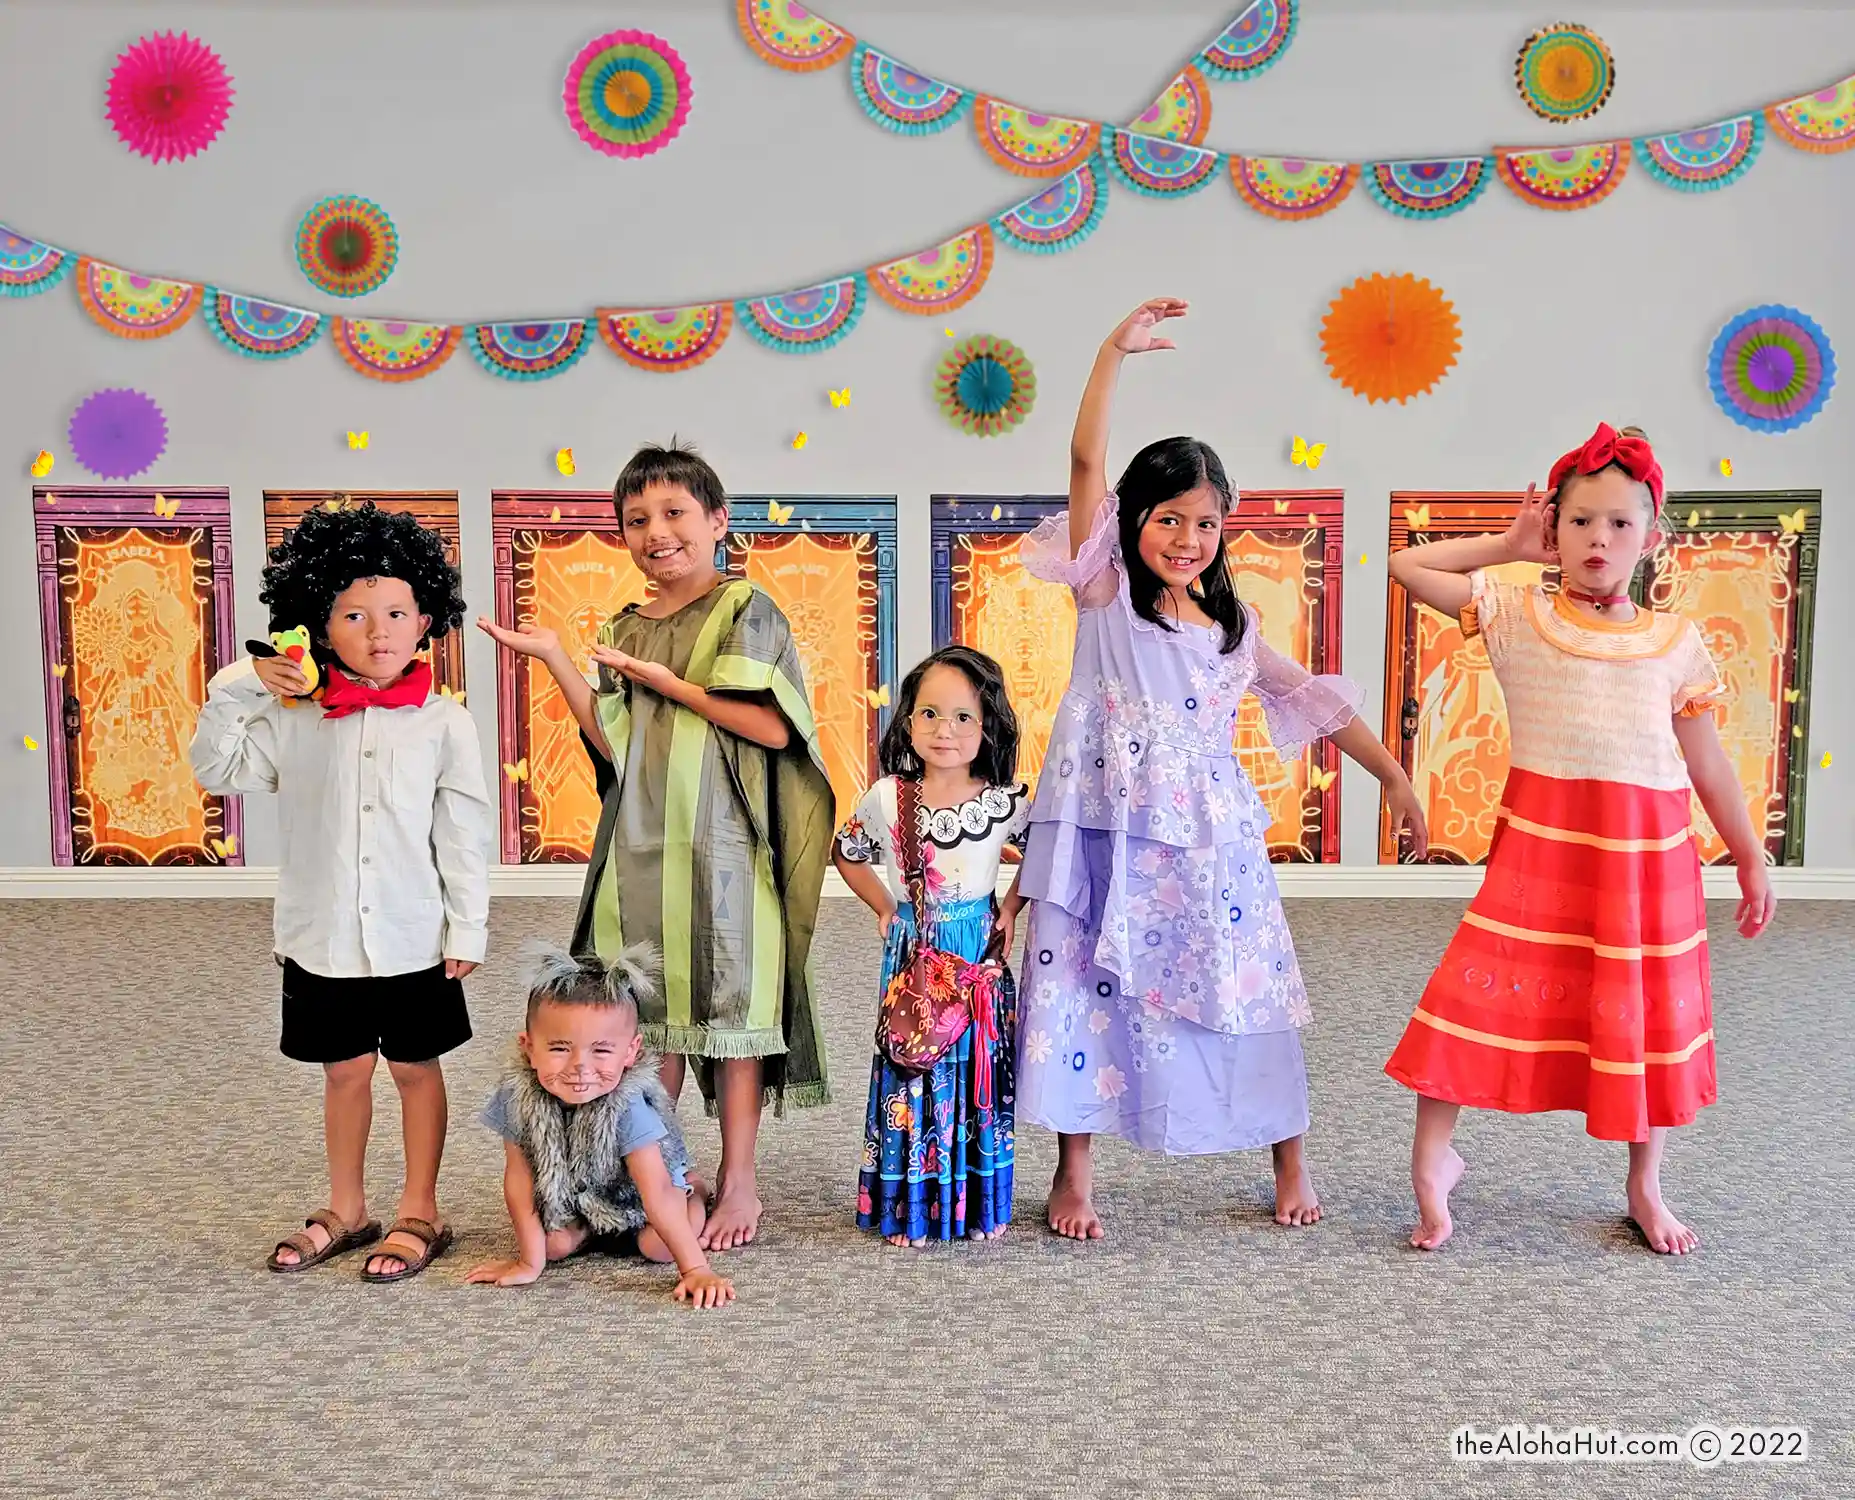 Encanto Party Ideas - dress up as characters